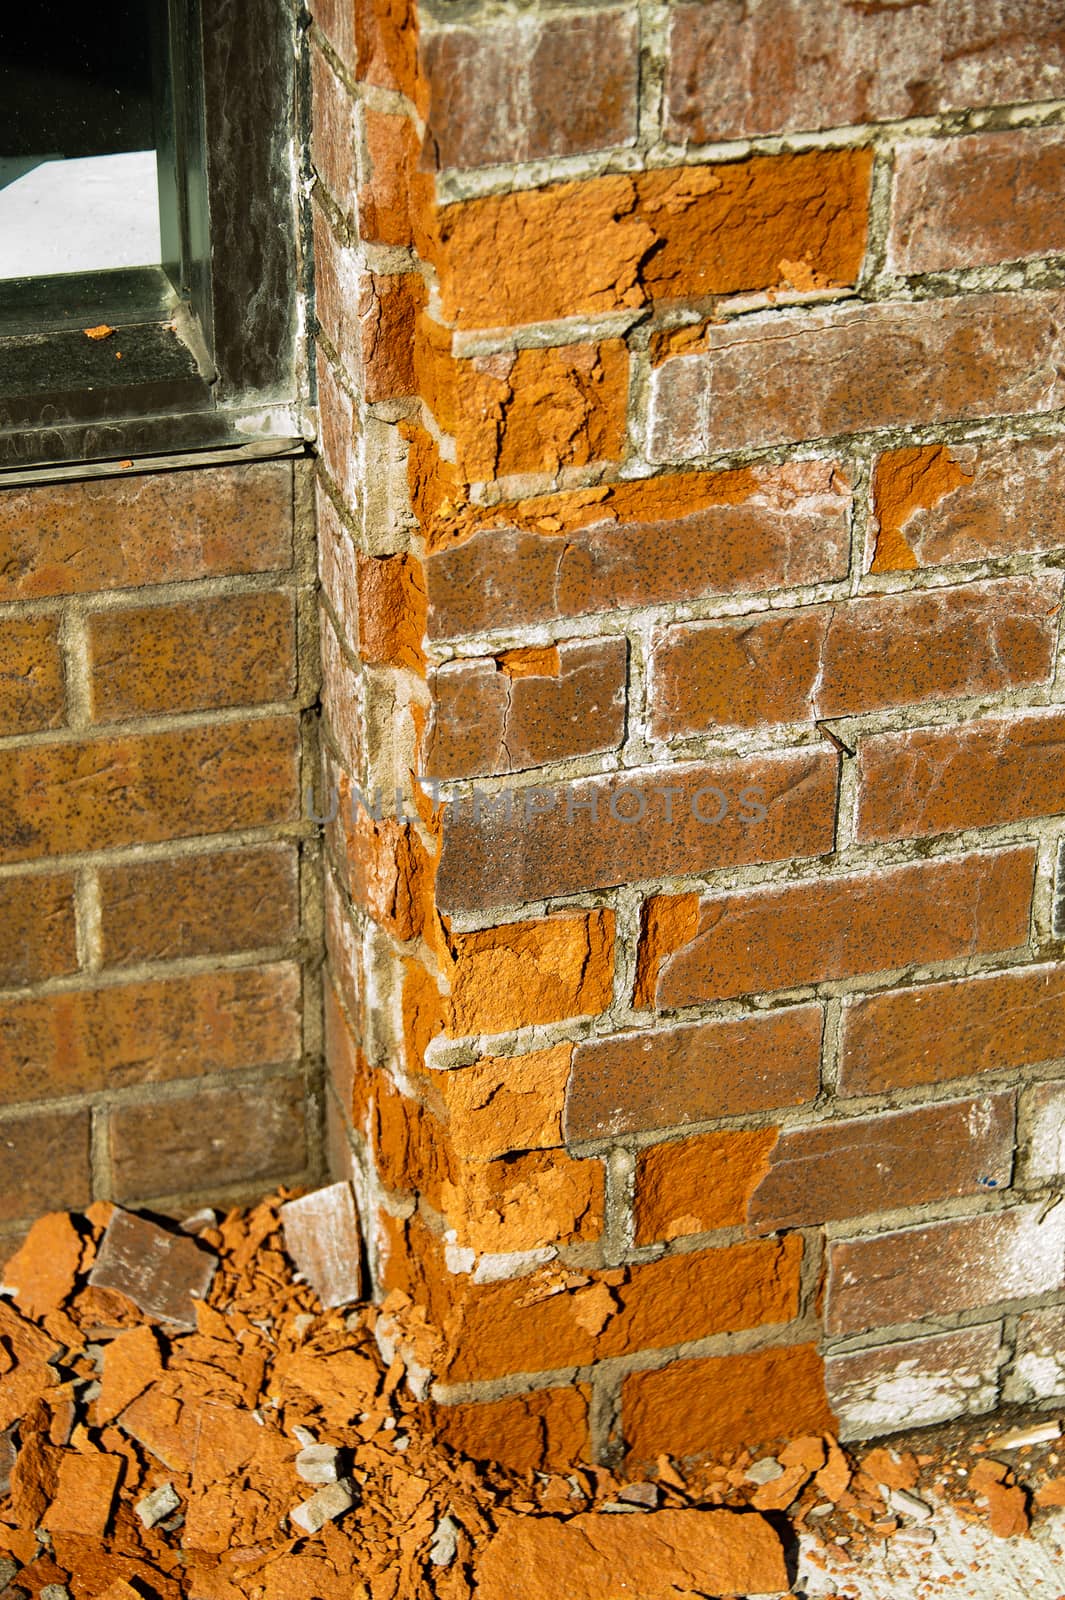 Fragment of the wall of red brick, where the bricks began to crumble from moisture and frosts